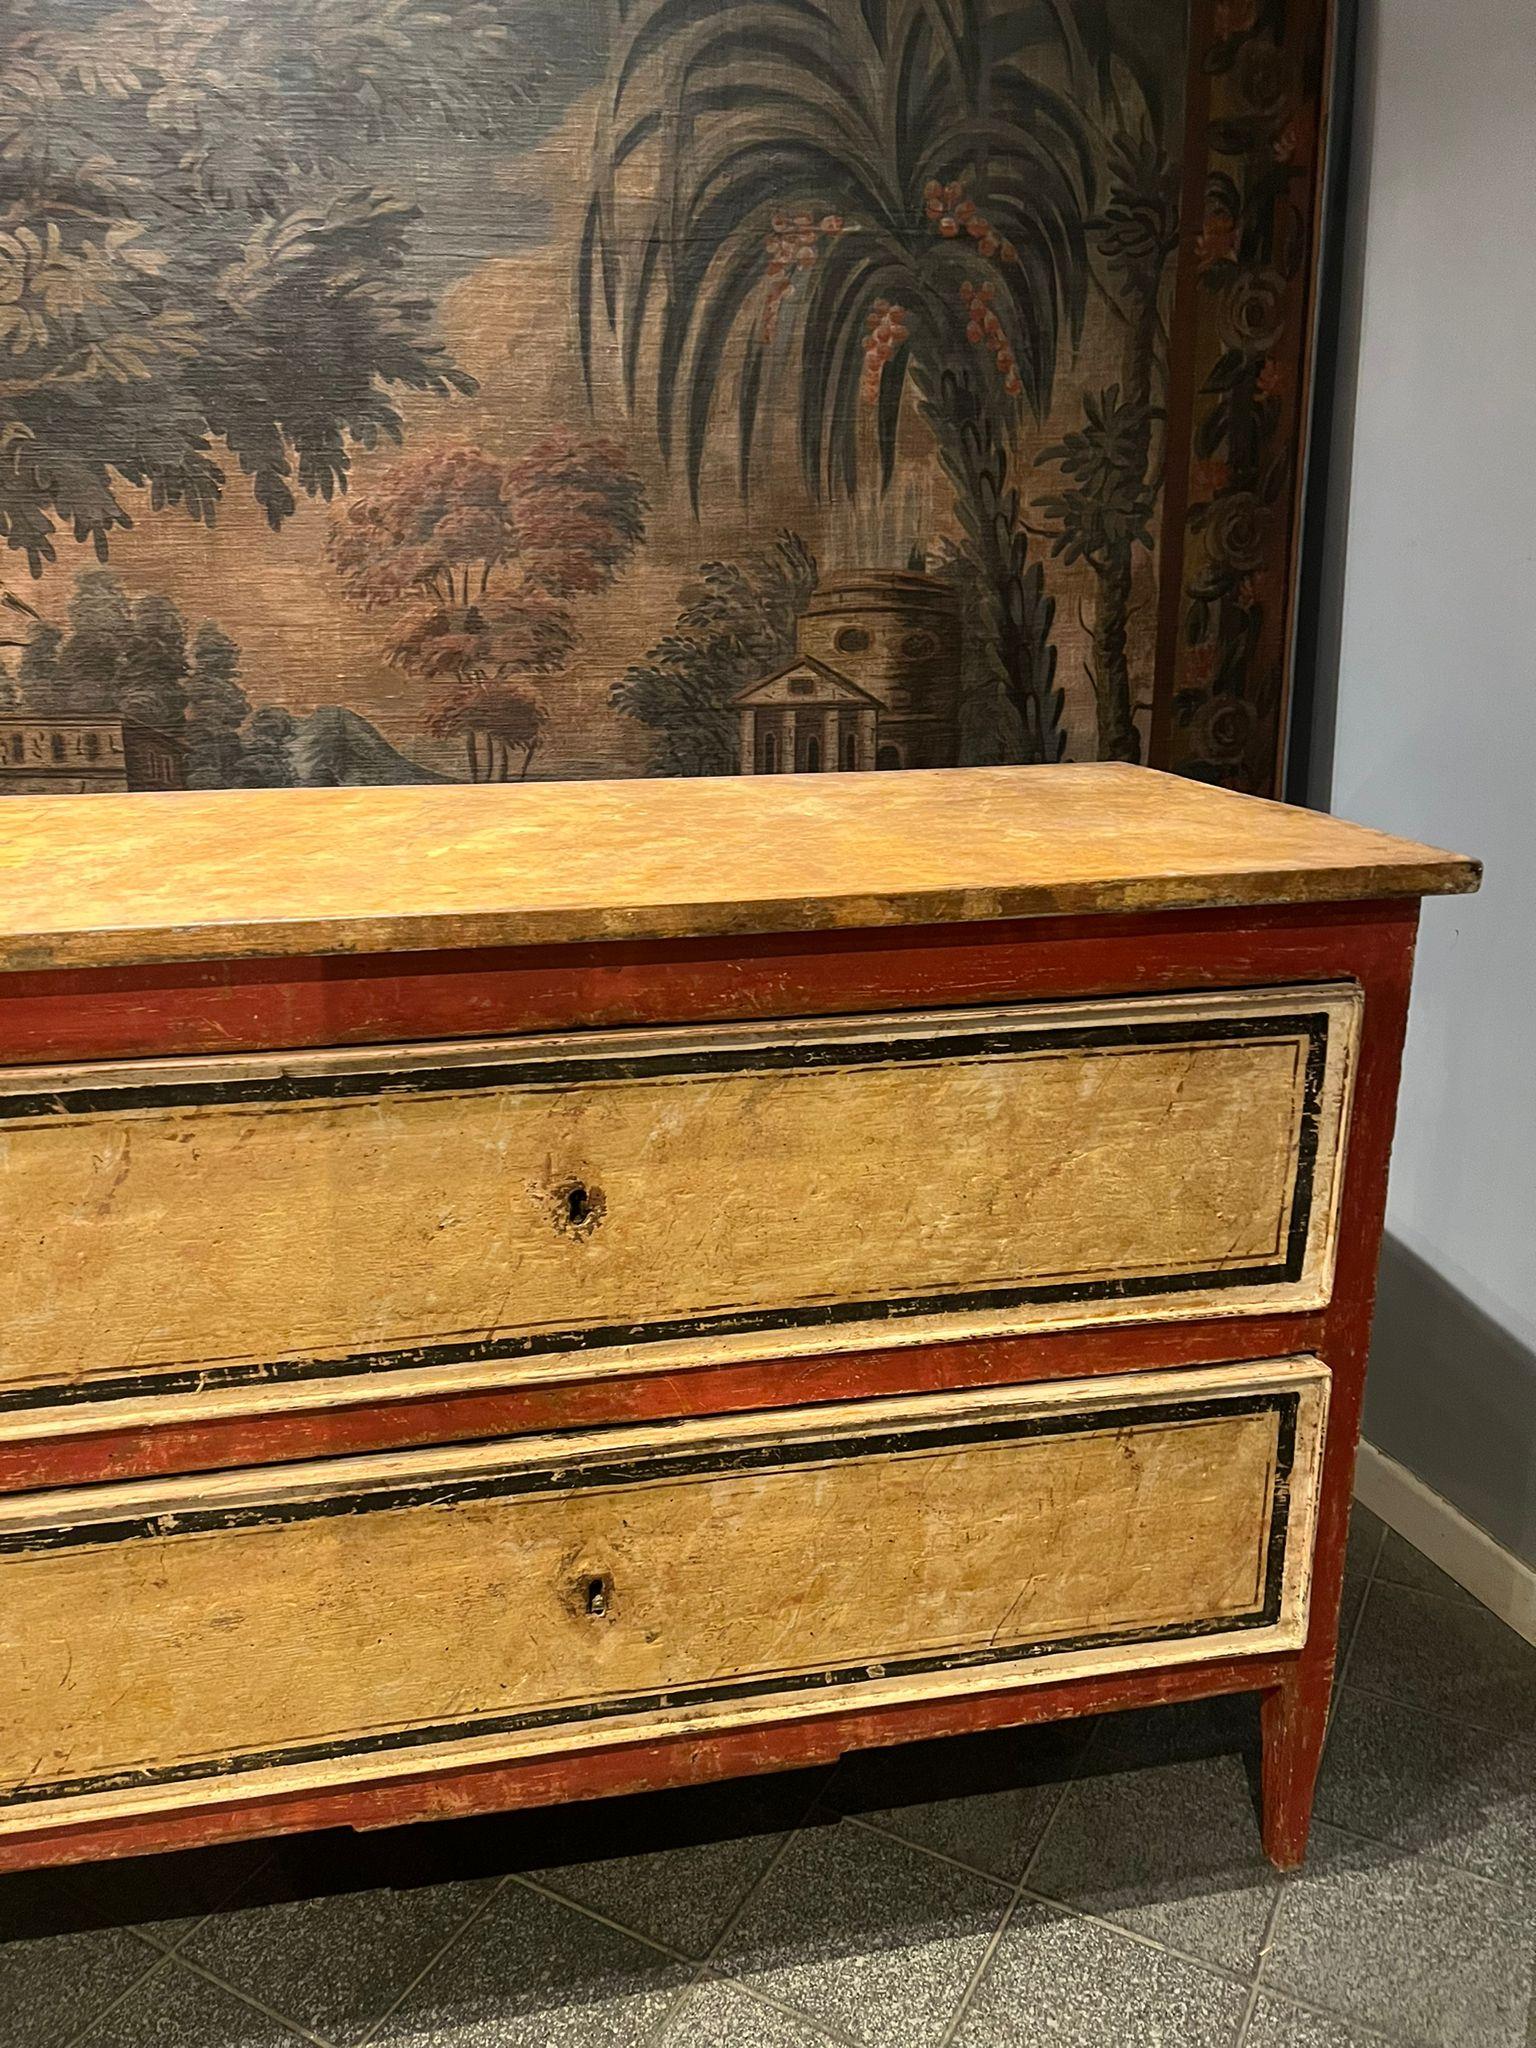 Rare 18th-century fir wood dresser, painted in shades of yellows, reds, and blacks. 

Extremely refined triple-threaded decoration on the drawers and sides. 

Dimensions: 63x91x130 cm